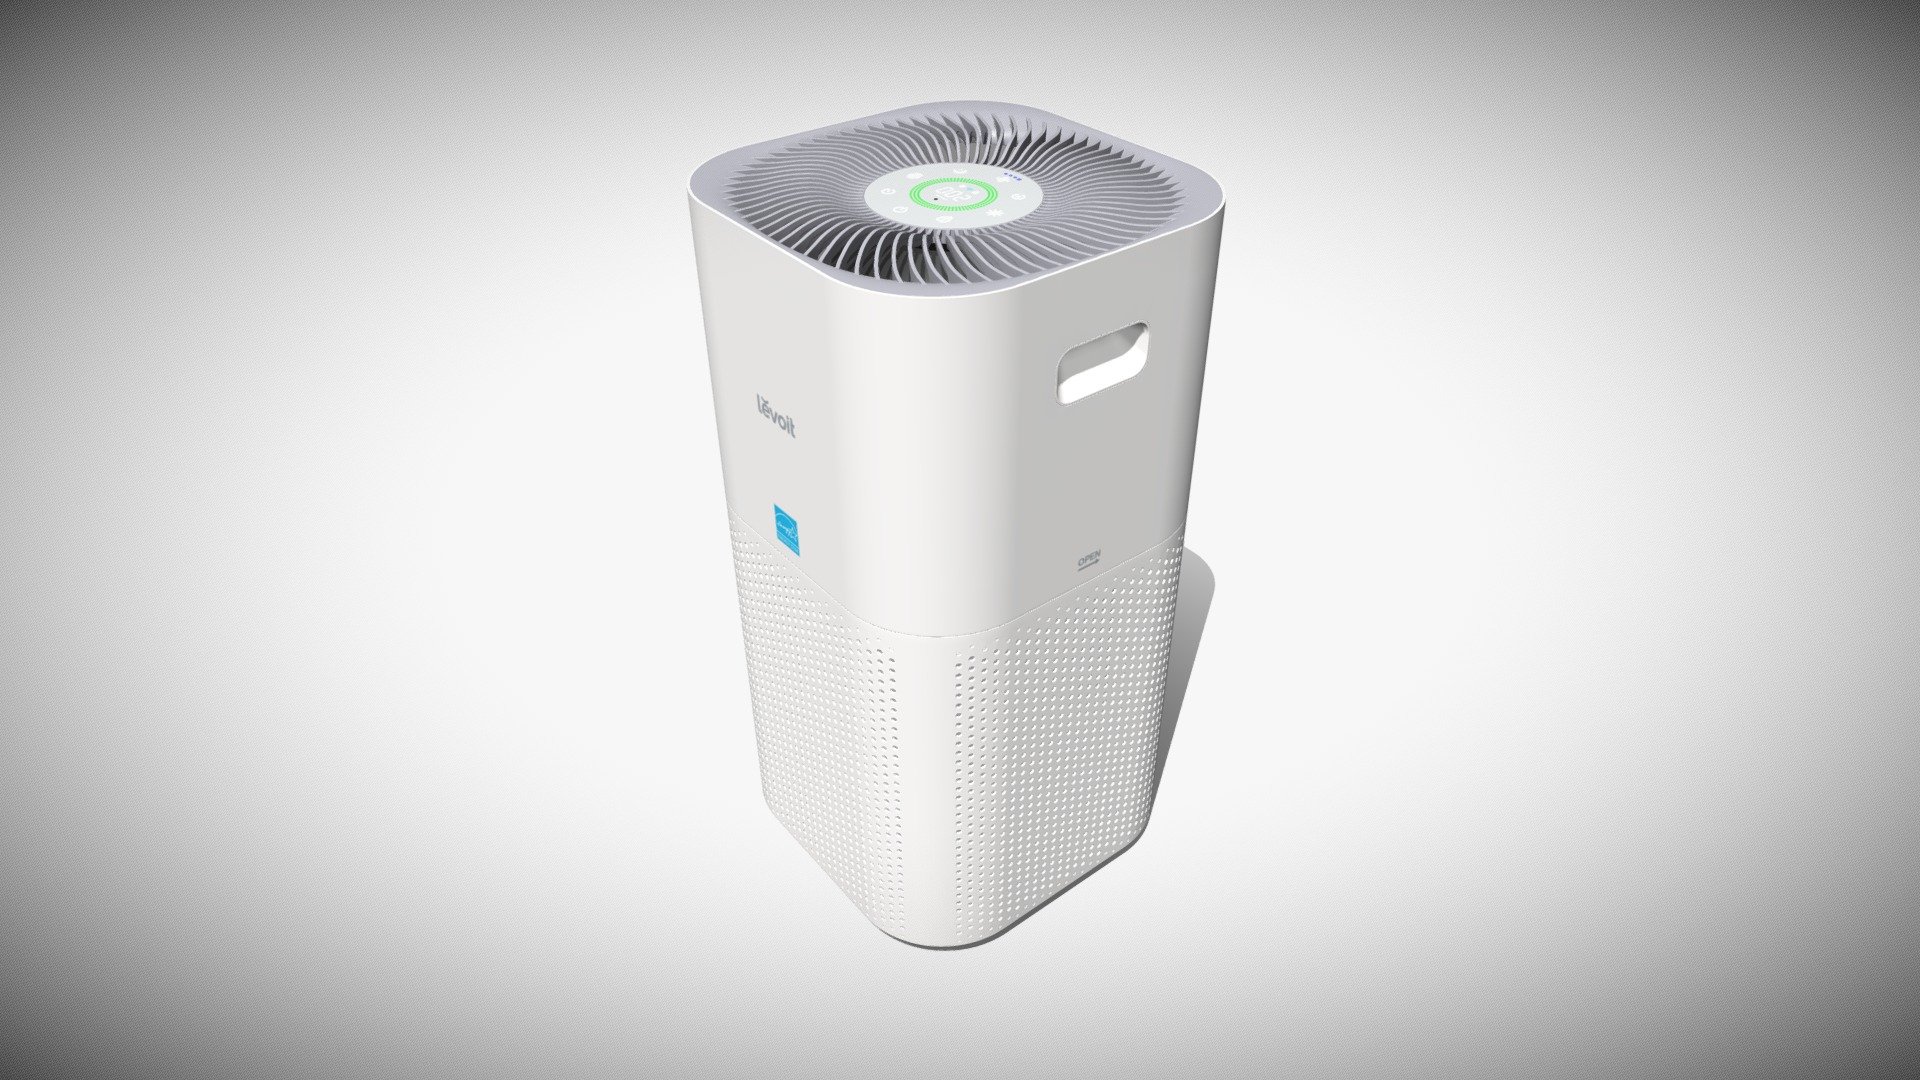 Detailed model of a white Levoit Core 600S Air Purifier, modeled in Cinema 4D.The model was created using approximate real world dimensions.

The model has 173,804 polys and 183,353 vertices.

An additional file has been provided containing the original Cinema 4D project files with both standard and v-ray materials, textures and other 3d export files such as 3ds, fbx and obj 3d model